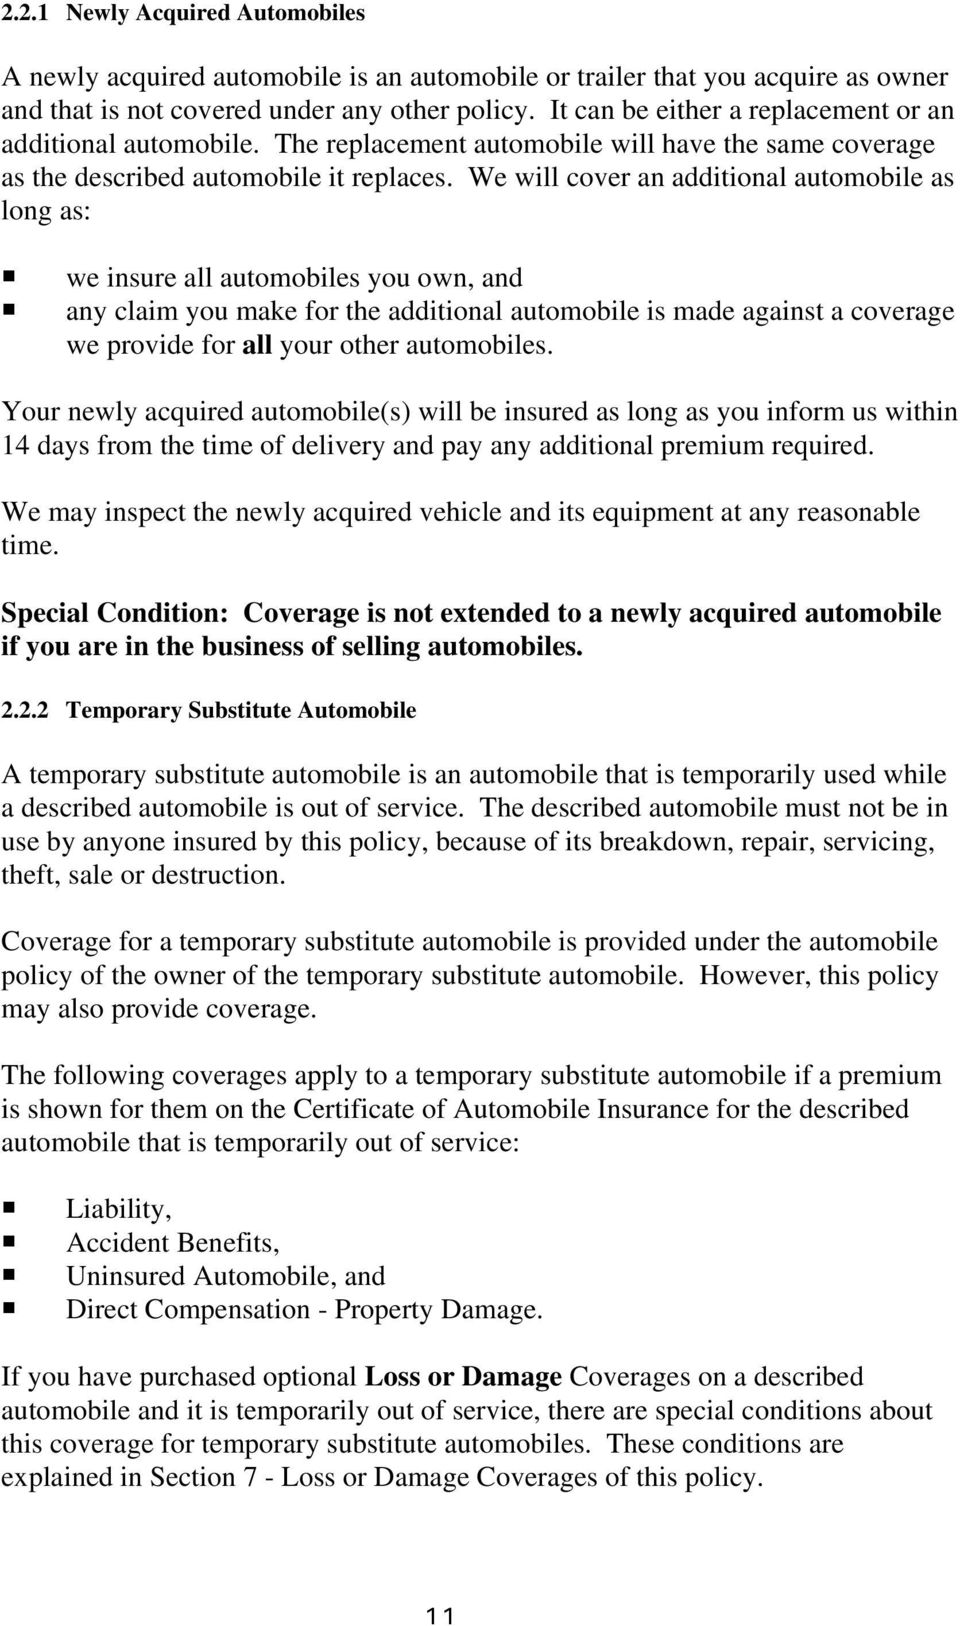 We will cover an additional automobile as long as: P P we insure all automobiles you own, and any claim you make for the additional automobile is made against a coverage we provide for all your other